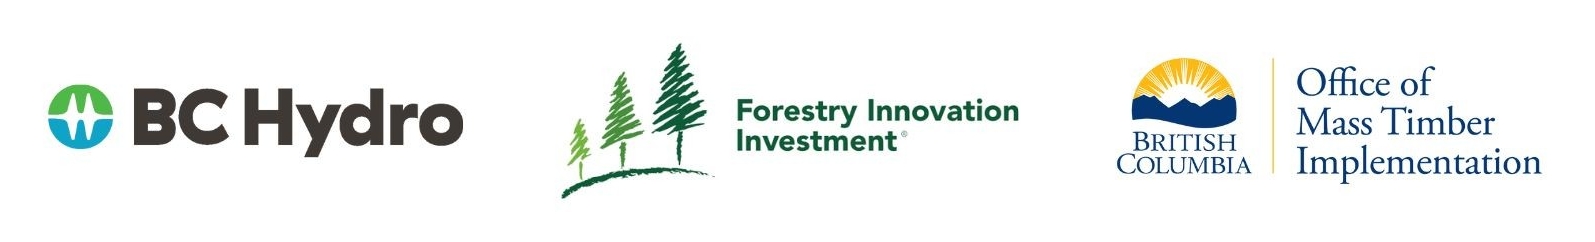 BC Hydro, Forest Innovation Investment and BC Office of Mass Timber Implementation